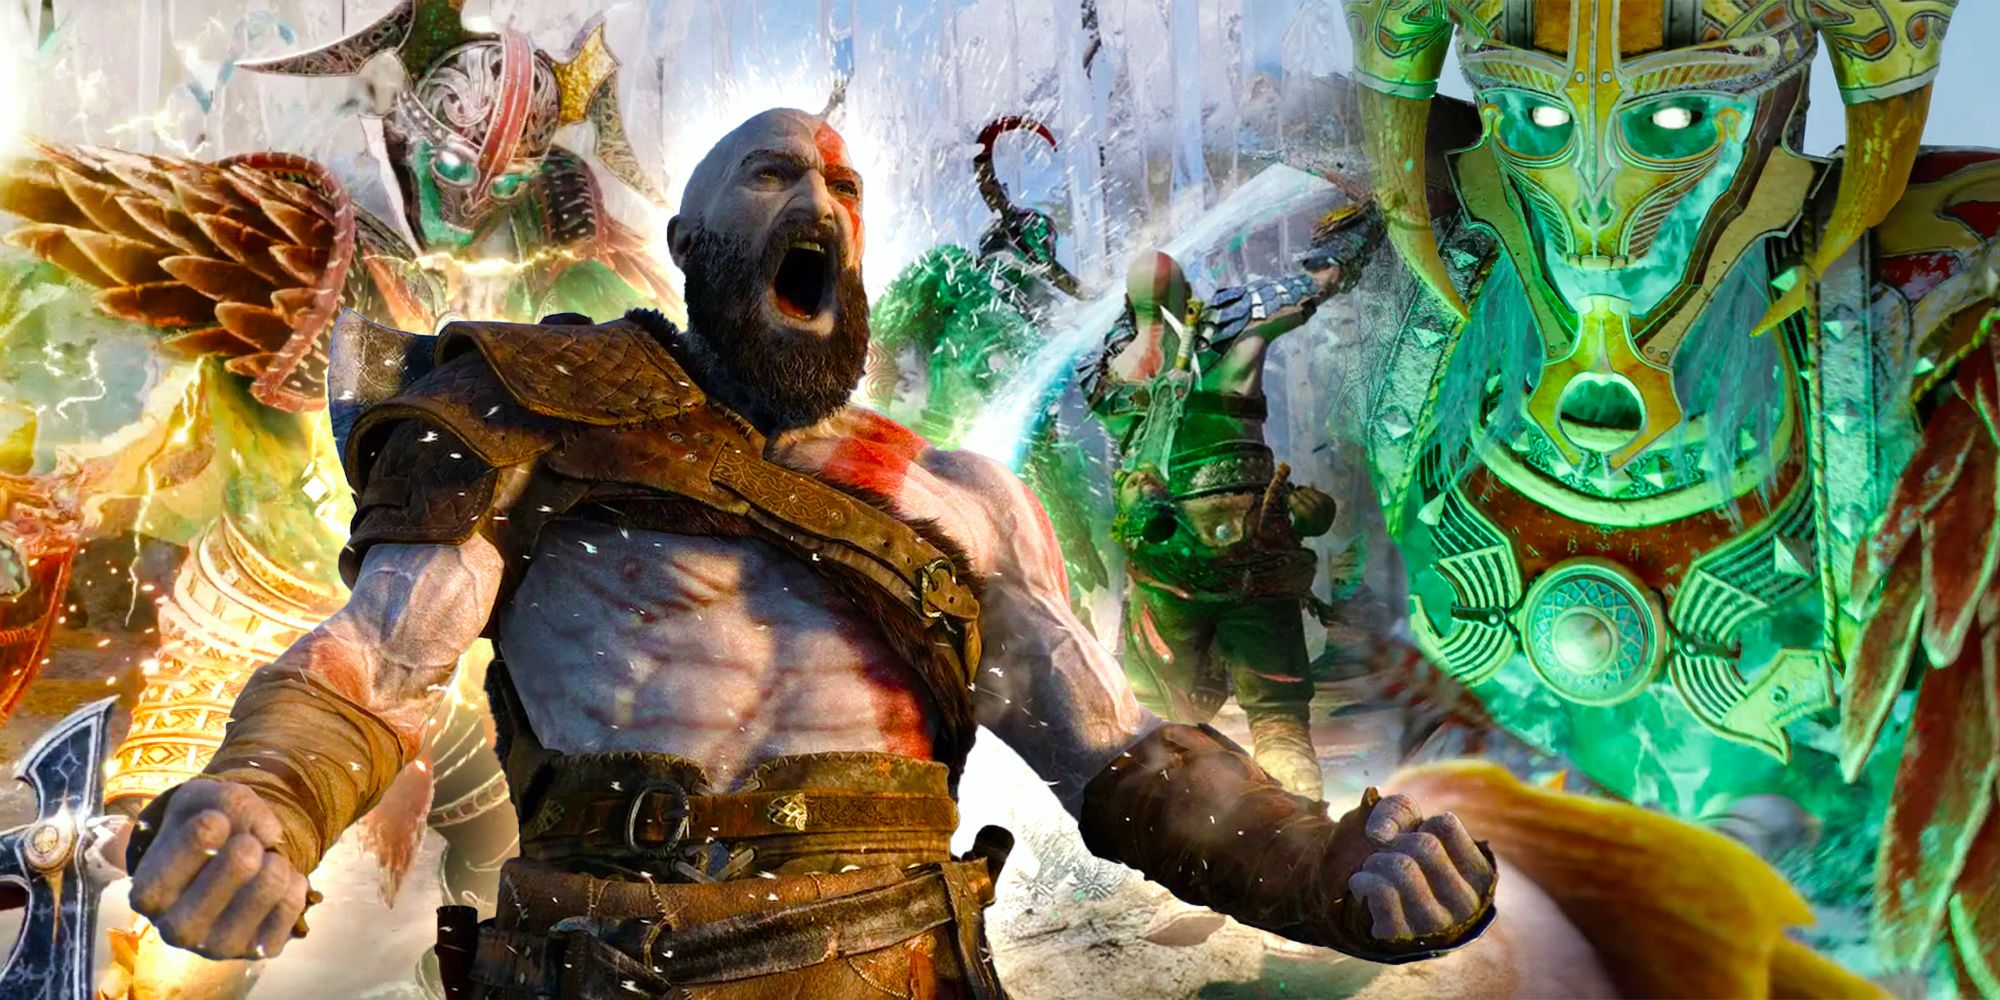 Kratos screaming with his arms to his sides with bosses from God Of War behind him. 